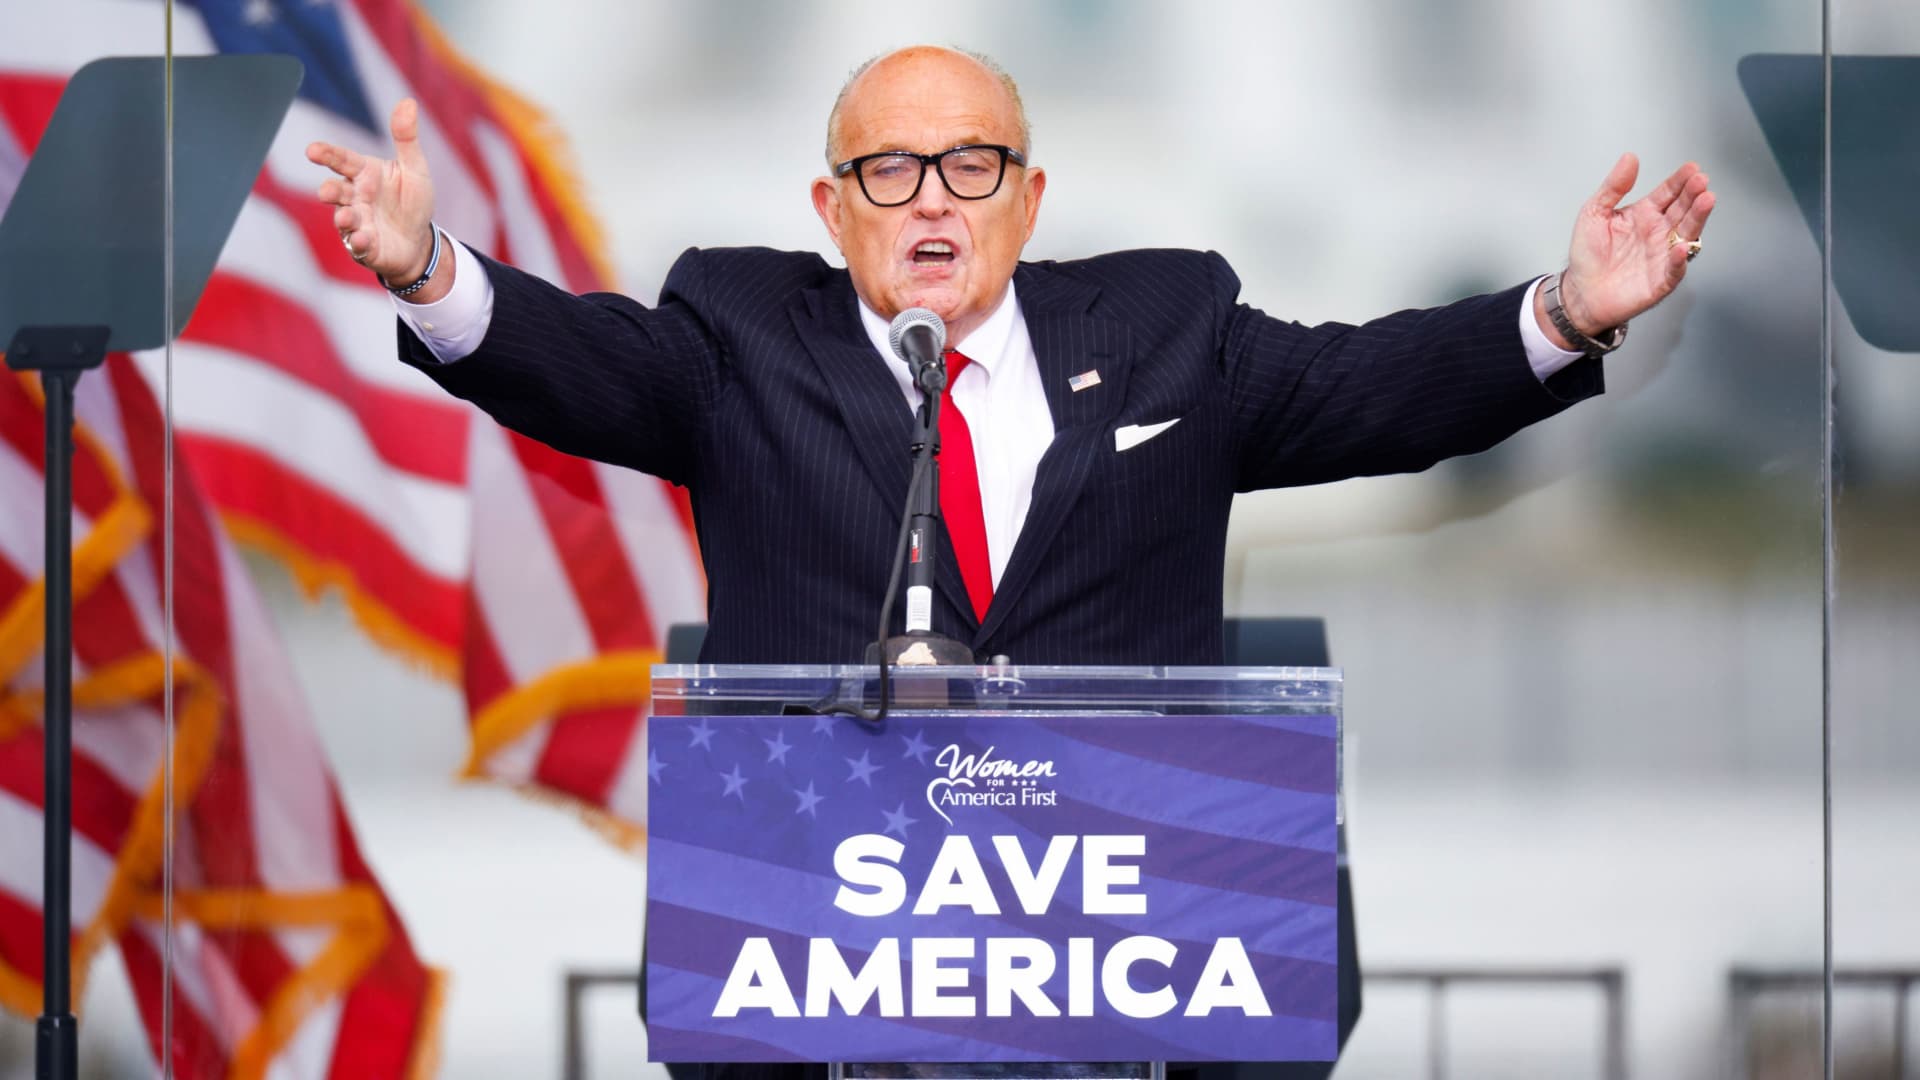 U.S. President Donald Trump's personal lawyer Rudy Giuliani gestures as he speaks as Trump supporters gather by the White House ahead of his speech to contest the certification by the U.S. Congress of the results of the 2020 U.S. presidential election in Washington, U.S, January 6, 2021.